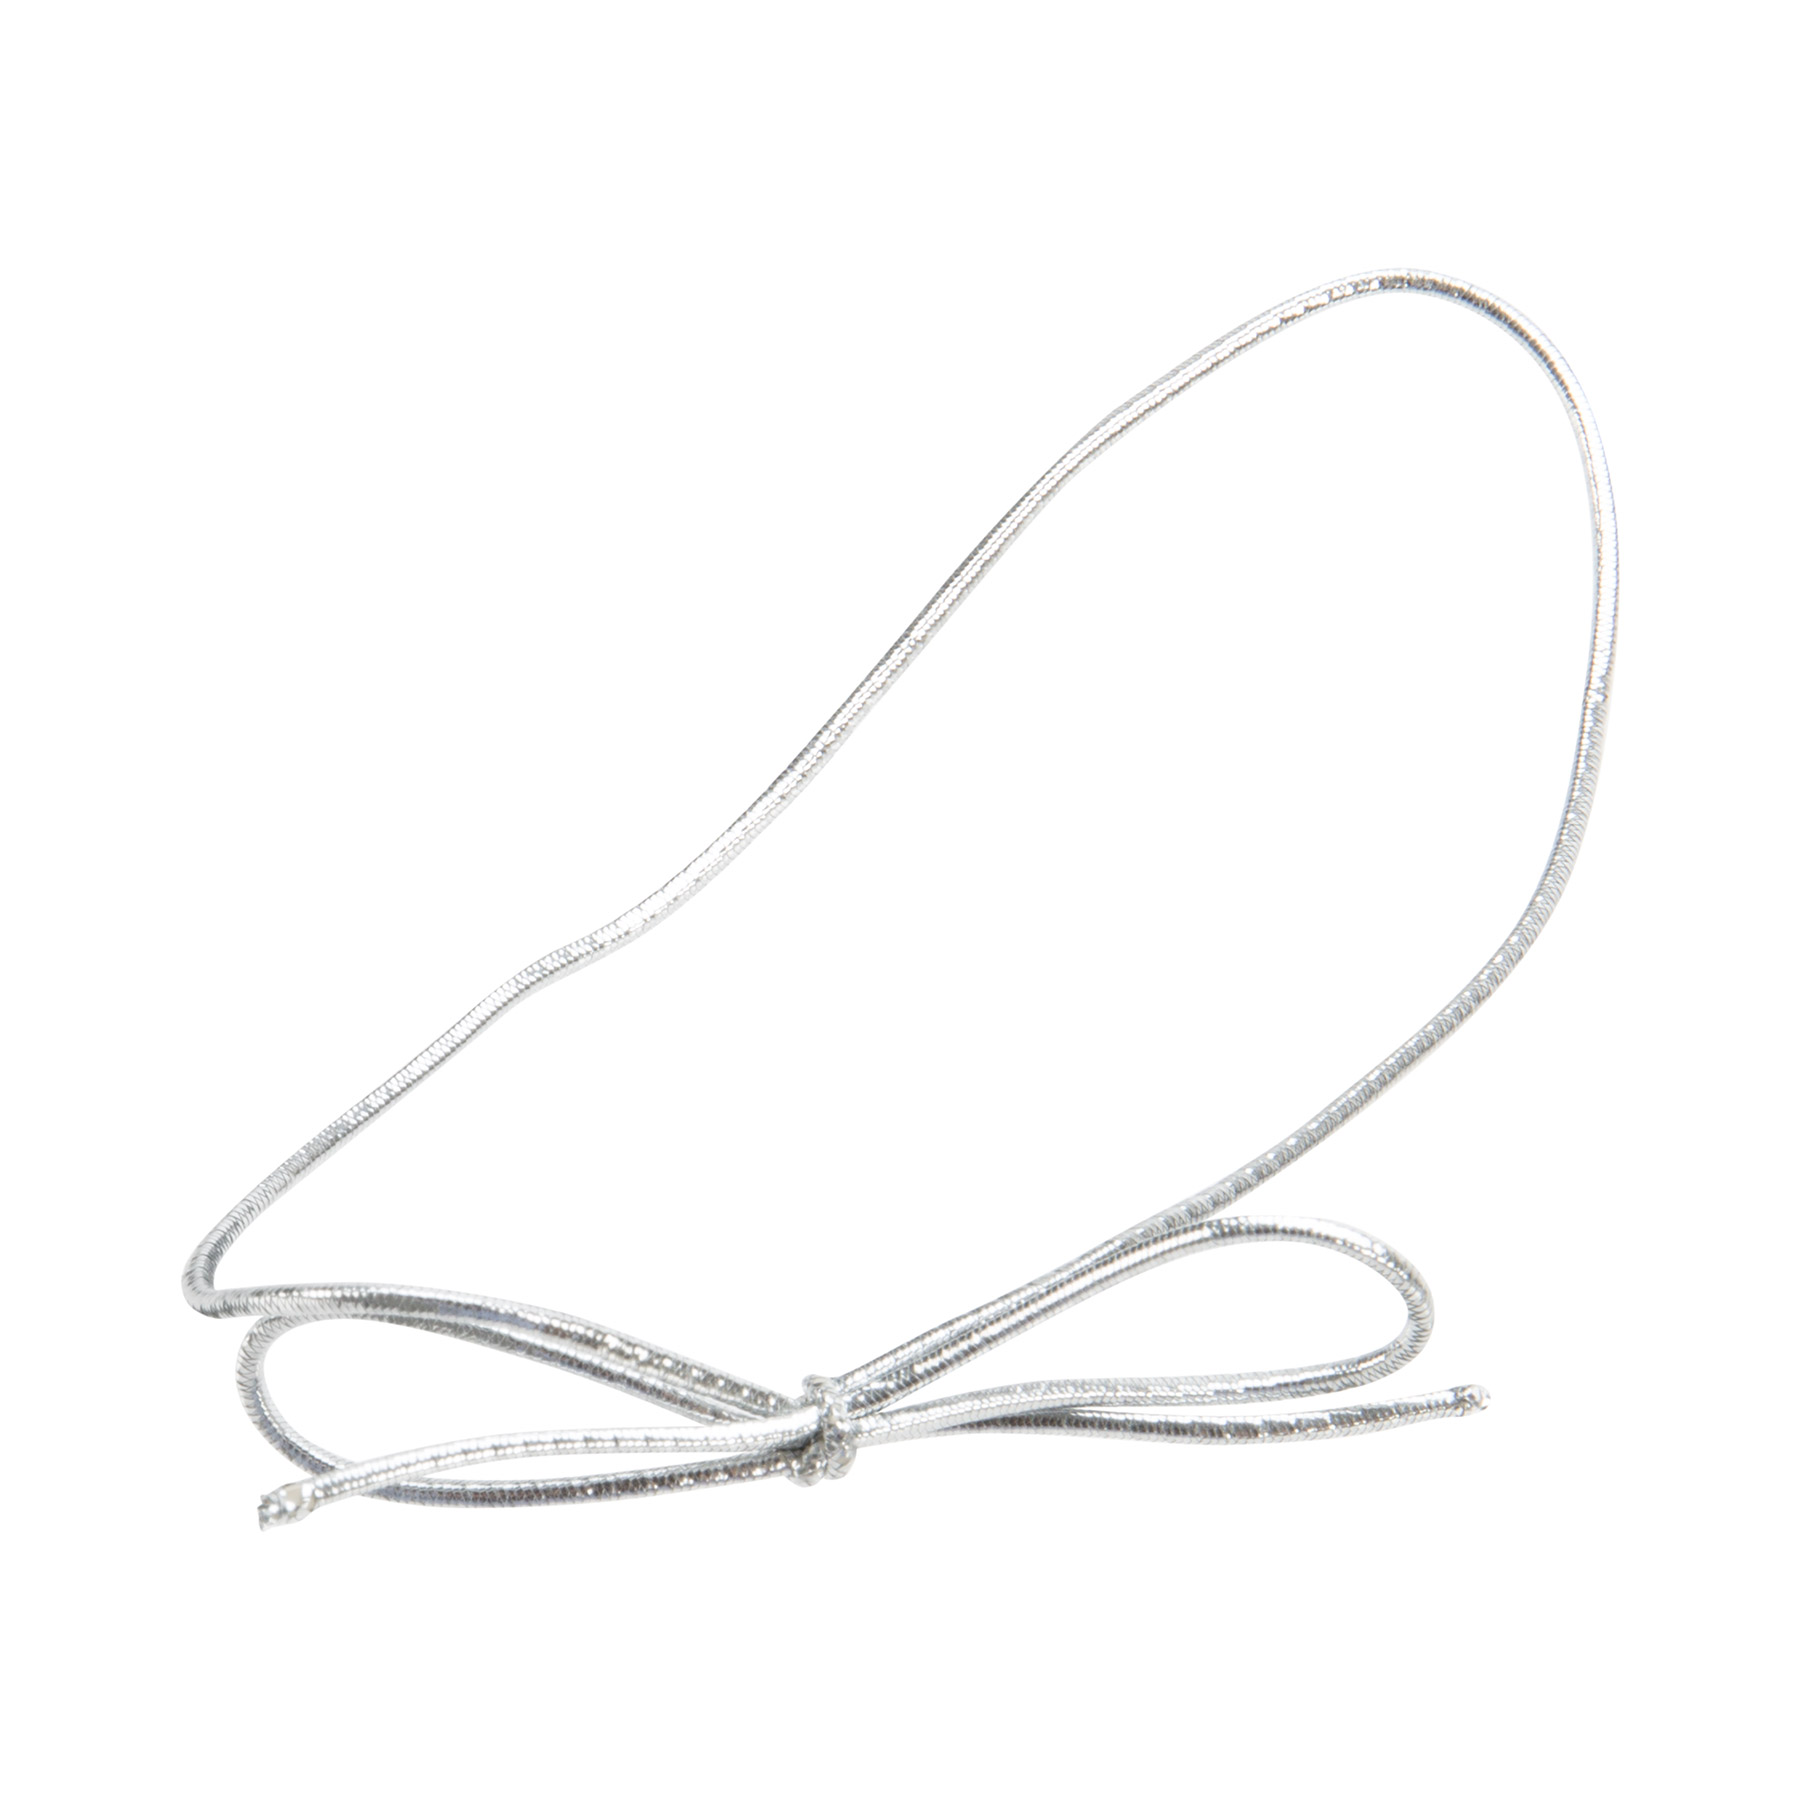 Shop for the Silver Metallic Elastic Waistband By Loops & Threads